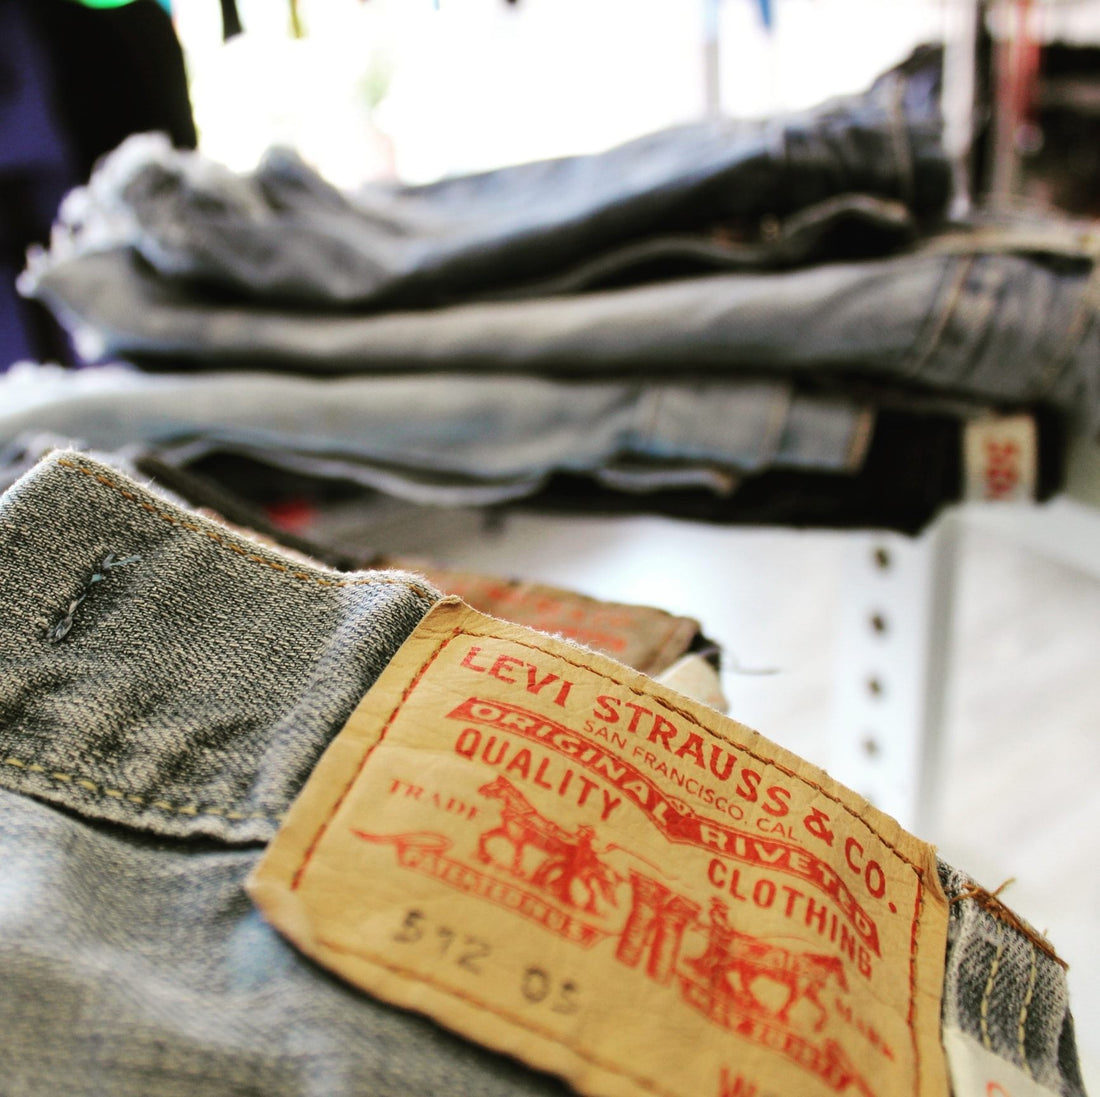 Made in USA in Pompiano: Levi's Strauss & Co.